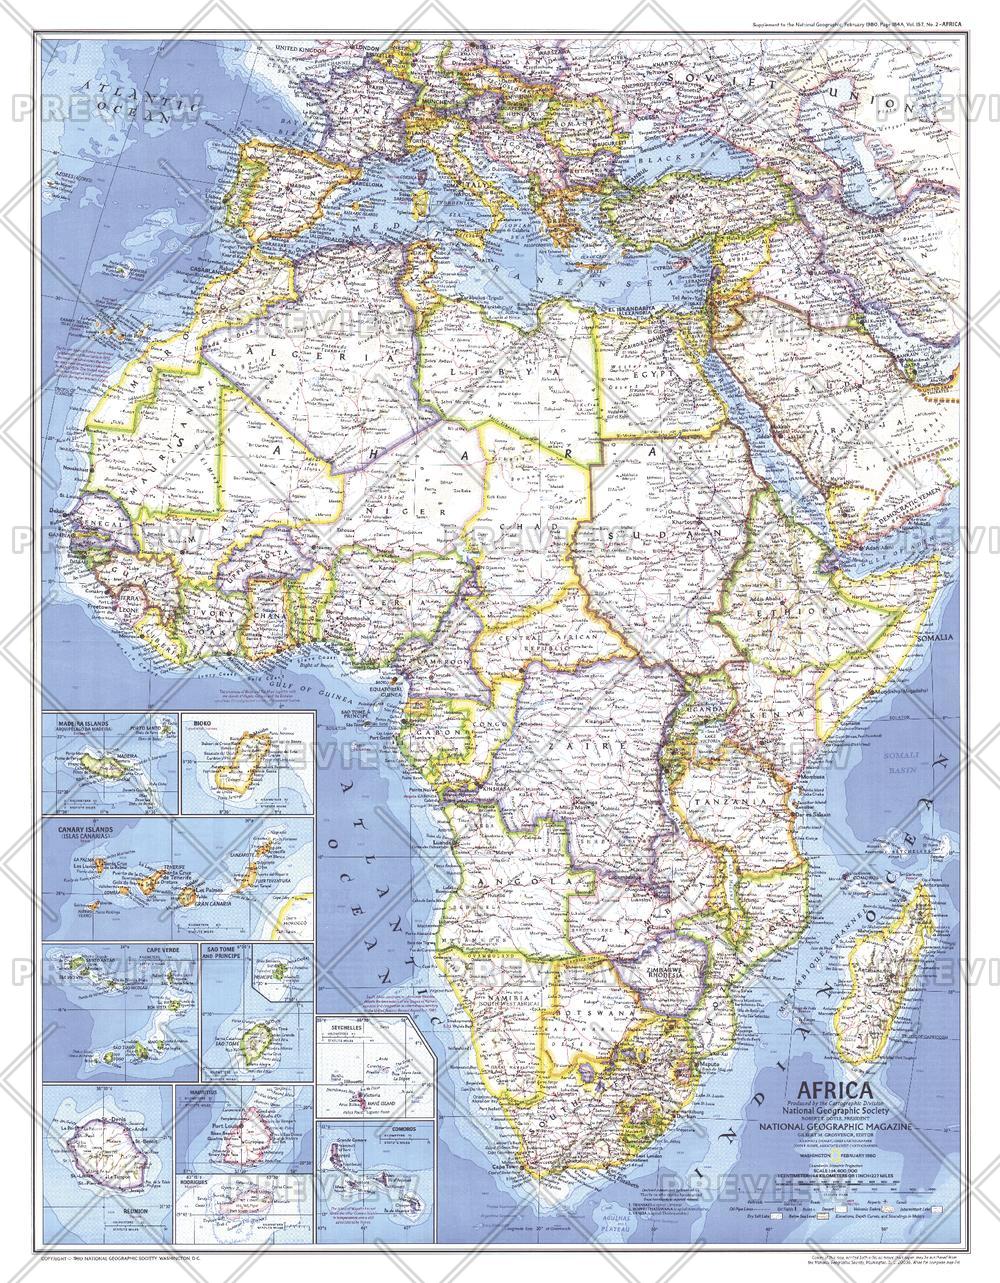 Africa Map Published 1980 National Geographic Maps